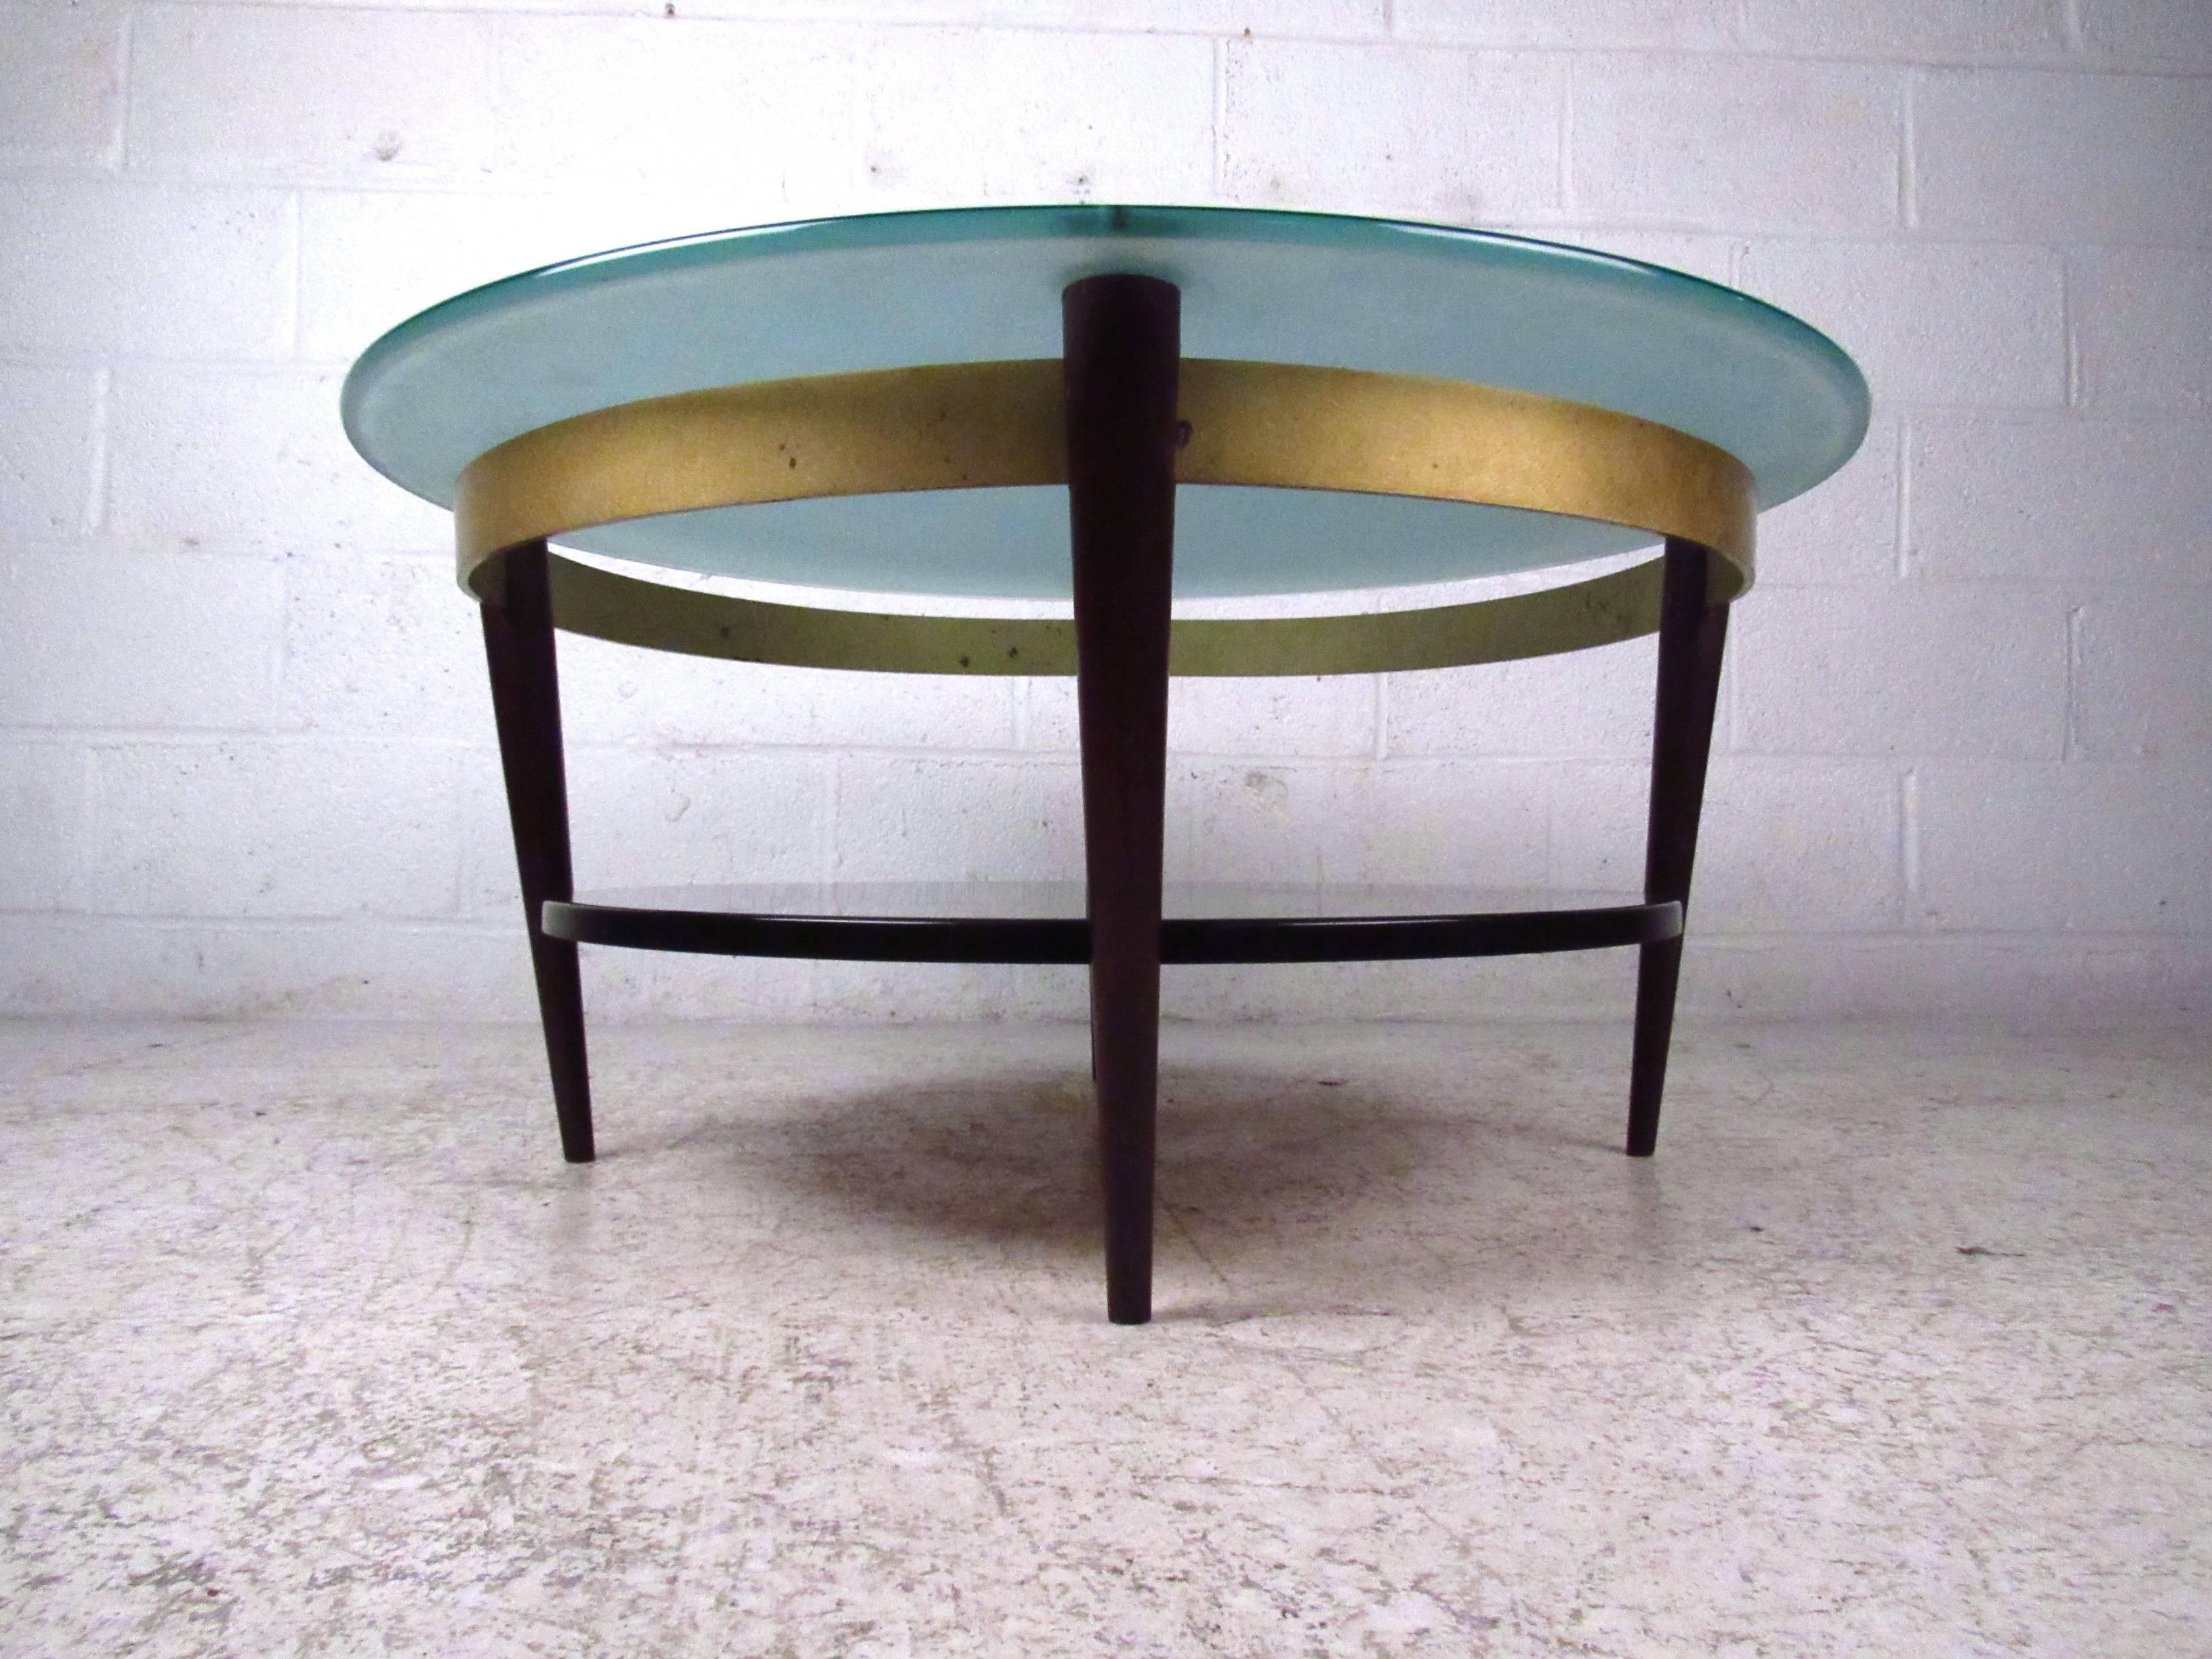 This unique frosted glass top coffee table features two tier design with vintage brass trim. Sturdy construction with wonderful mid-century design make this a unique table for any setting. Please confirm item location (NY or NJ). 